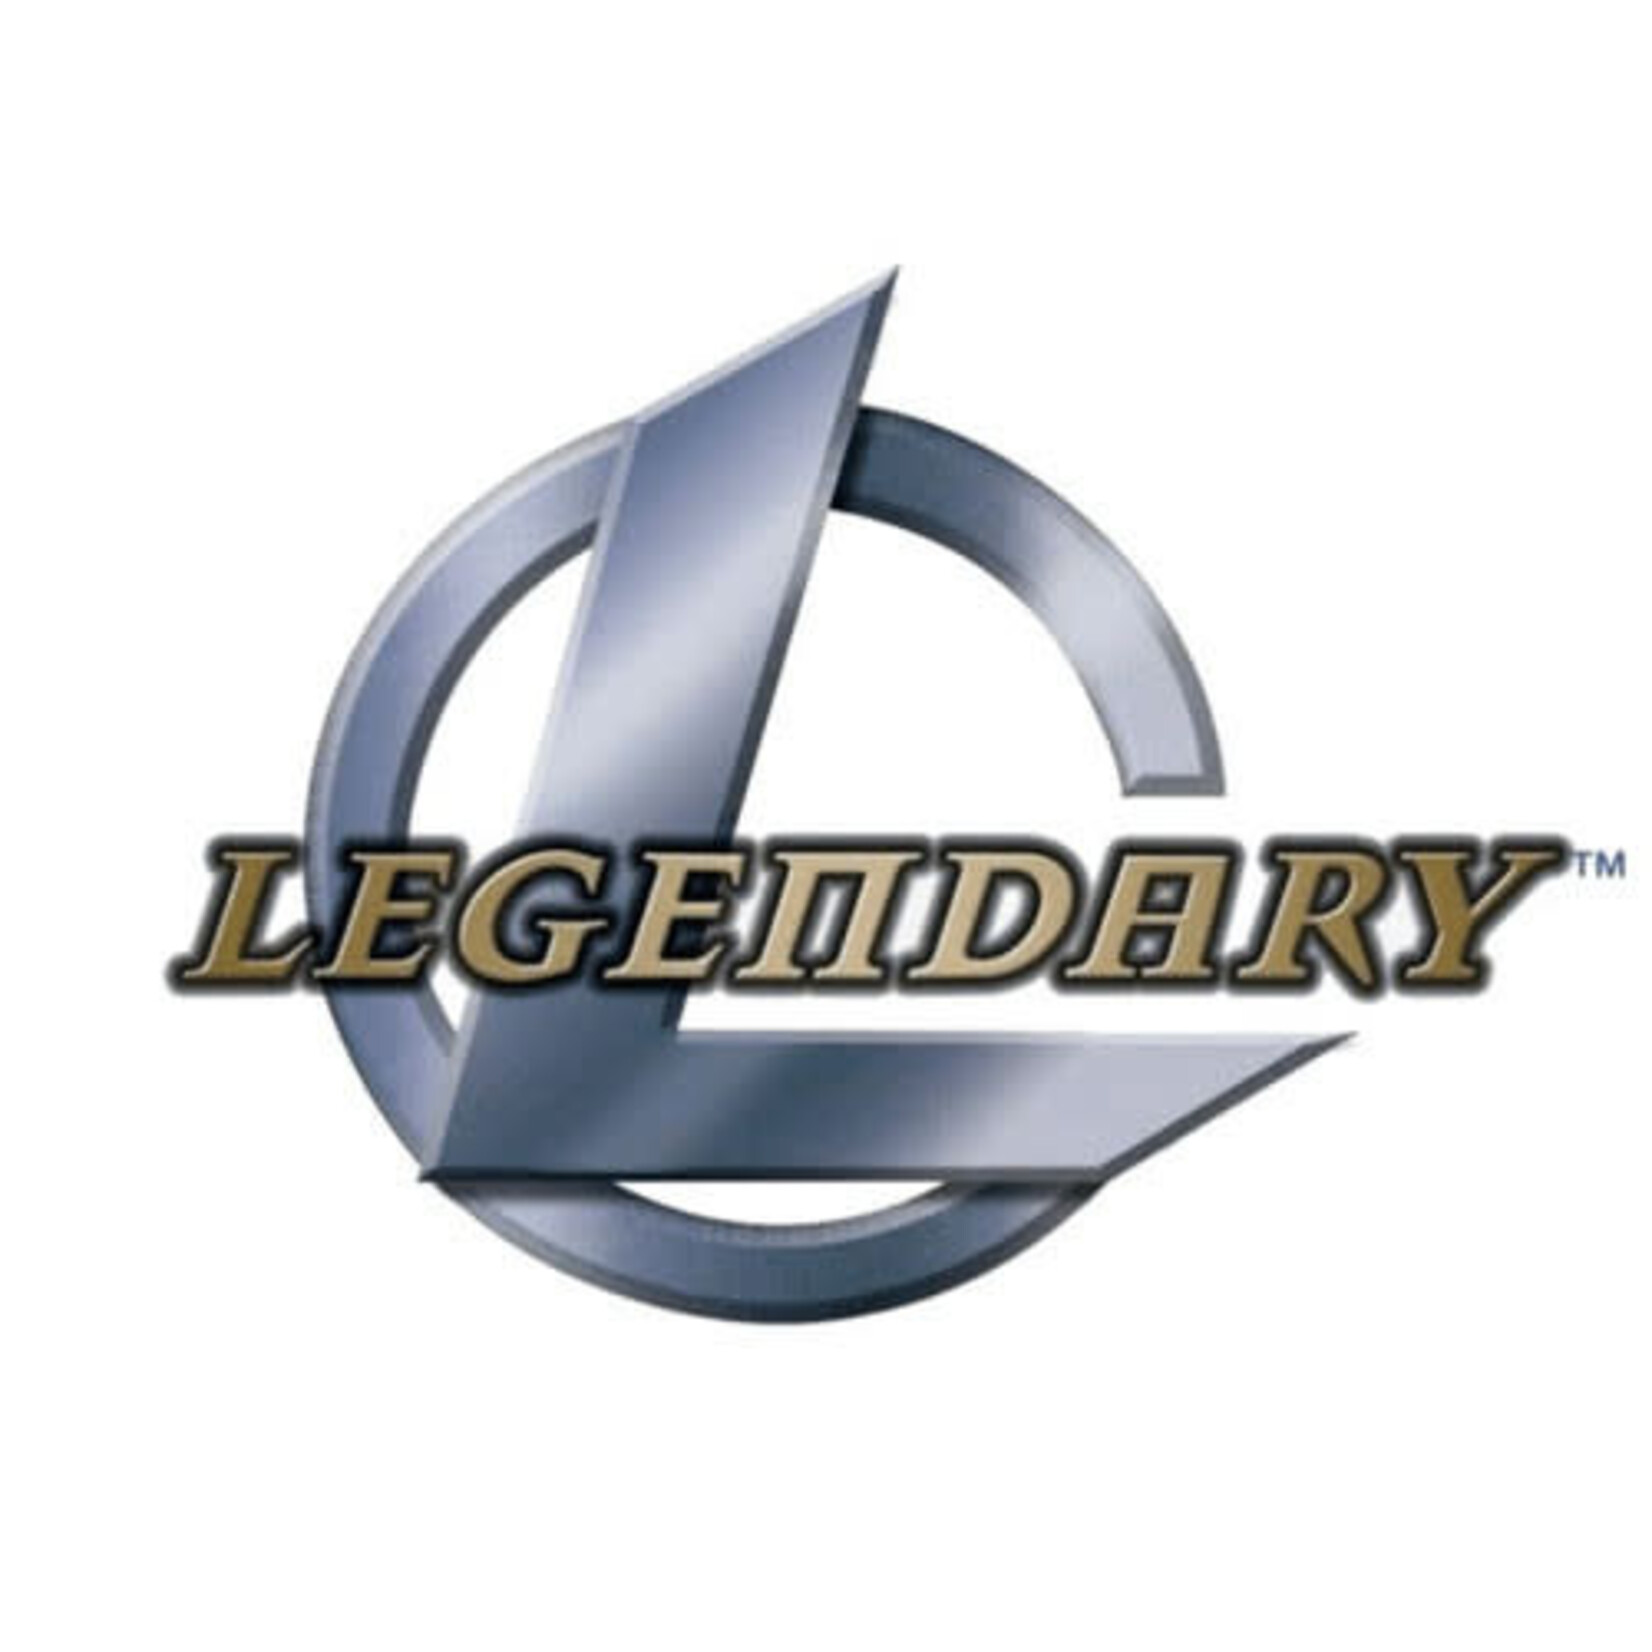 Upper Deck Entertainment Legendary DBG: Marvel - Doctor Strange and the Shadows of Nightmare Expansion